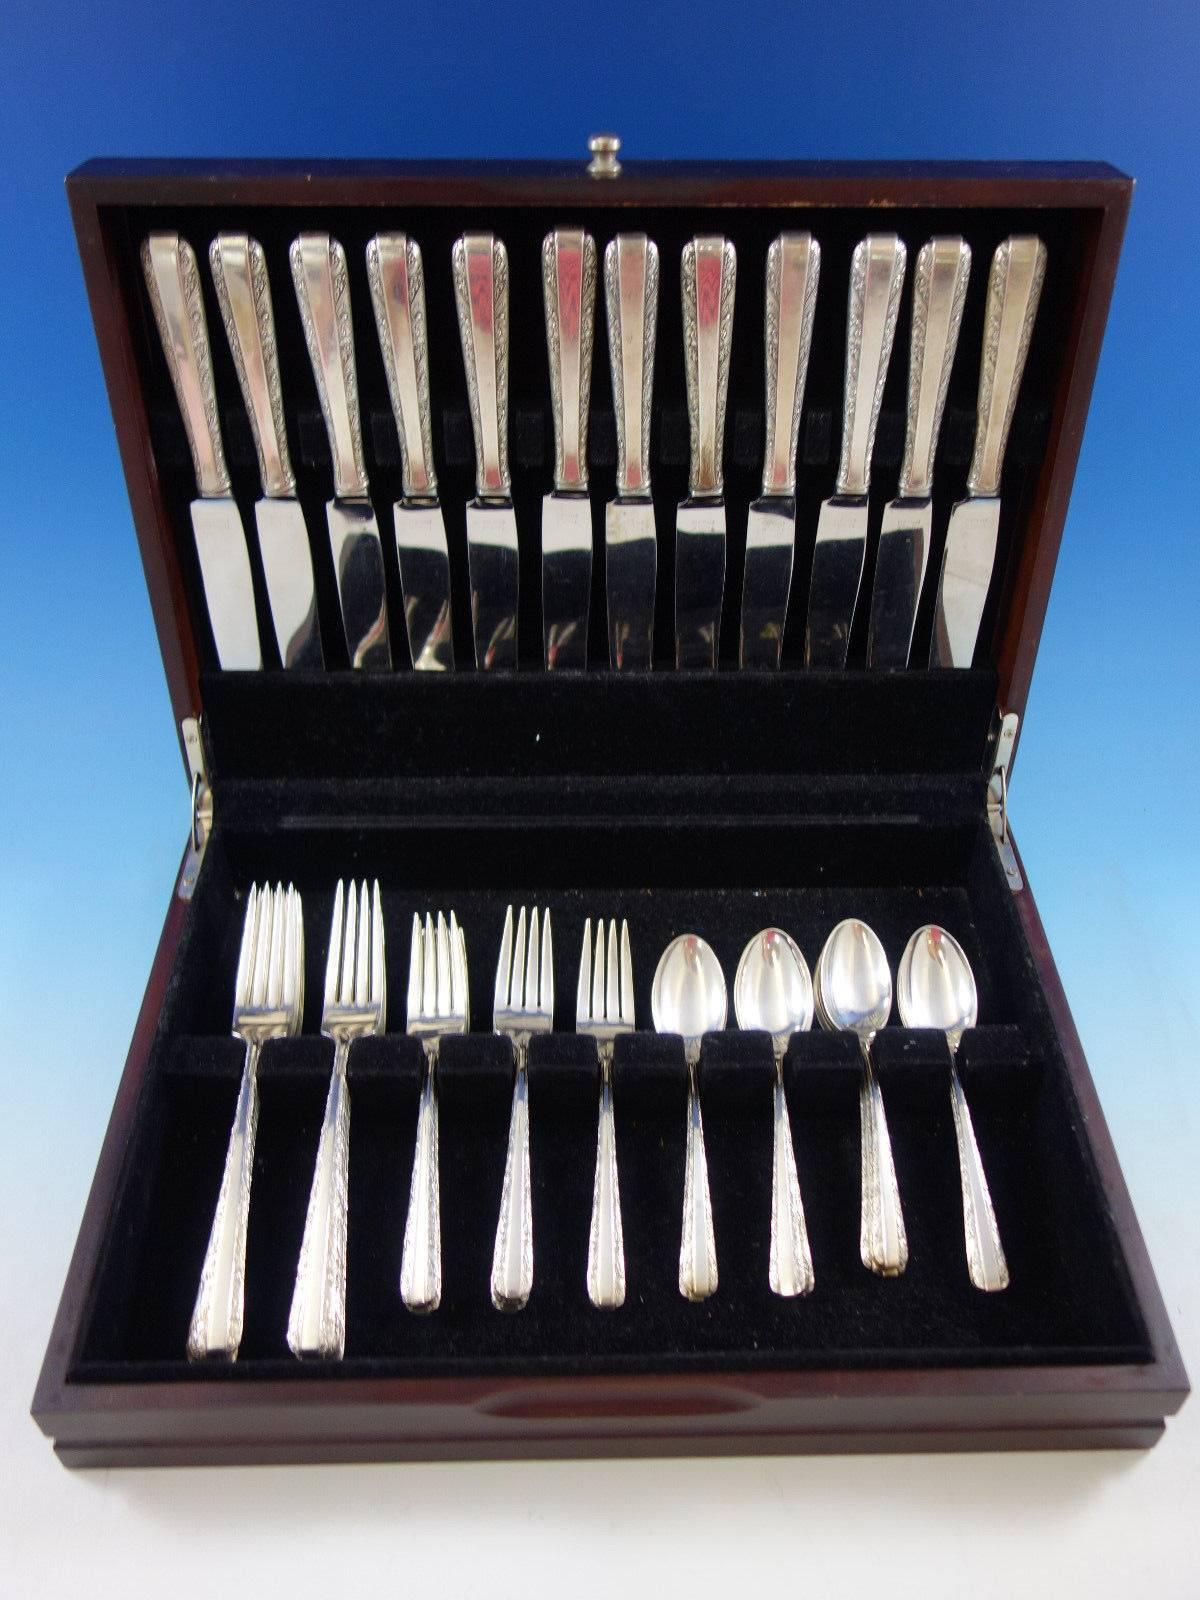 Candlelight by towle sterling silver flatware set, 48 pieces. This set includes: 

12 dinner size knives, 9 5/8